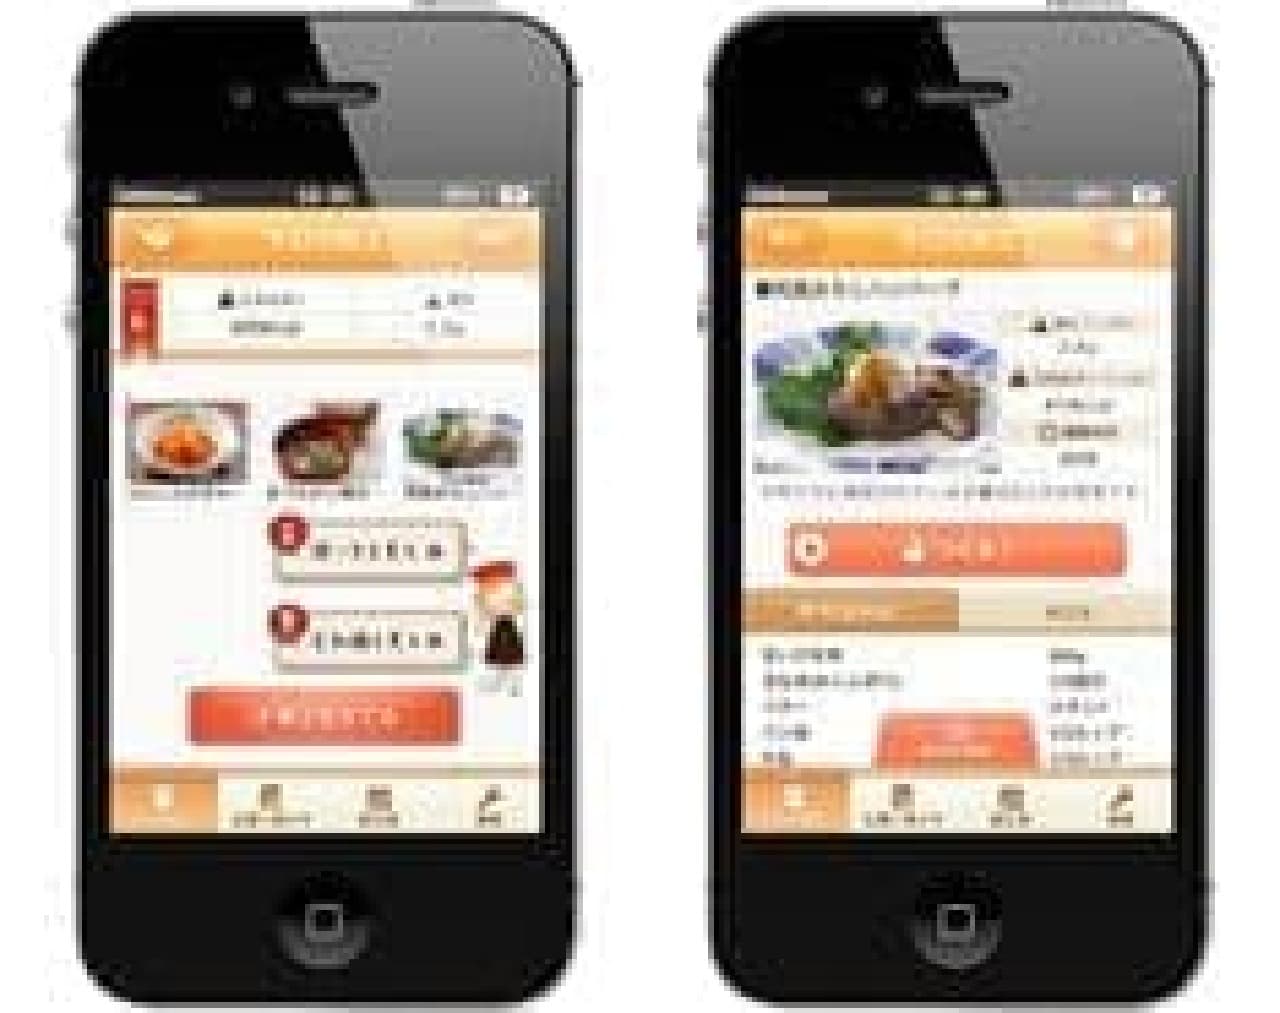 You can also check salt and calories! Free recipe search app from Kikkoman